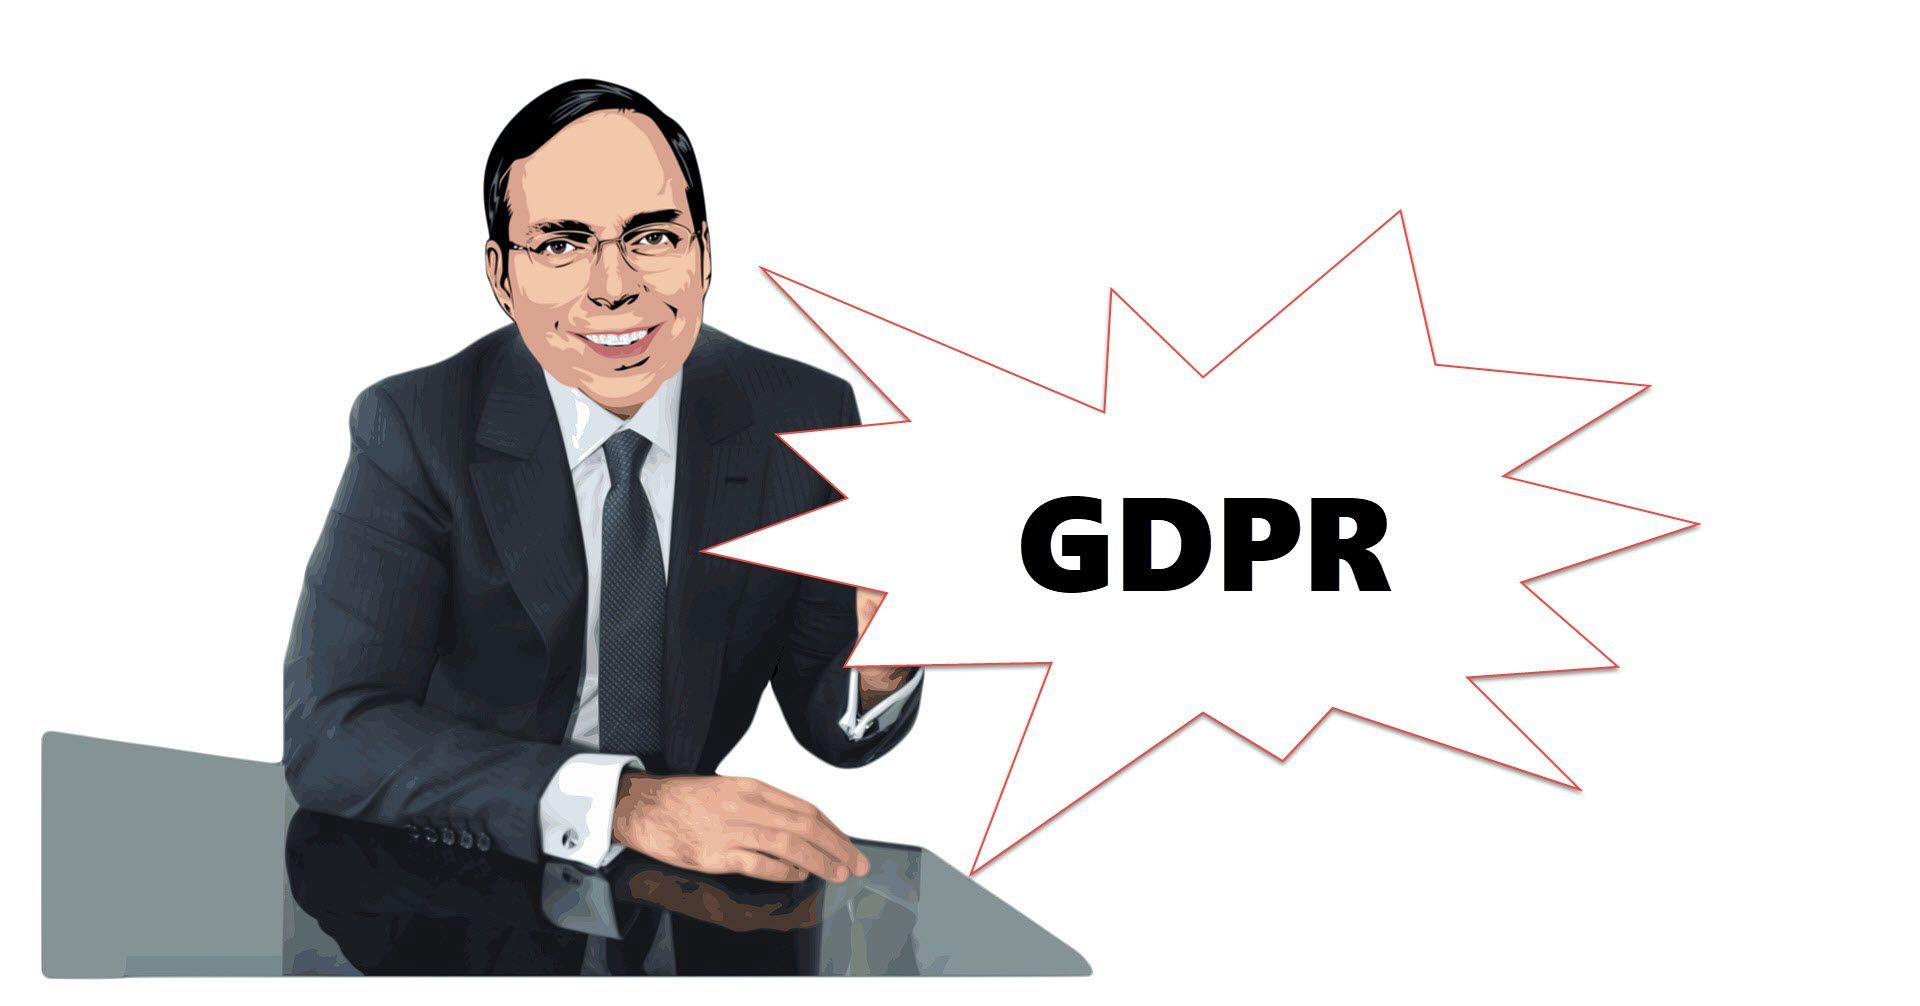 The Salesman’s Perfect Recipe for Milking GDPR